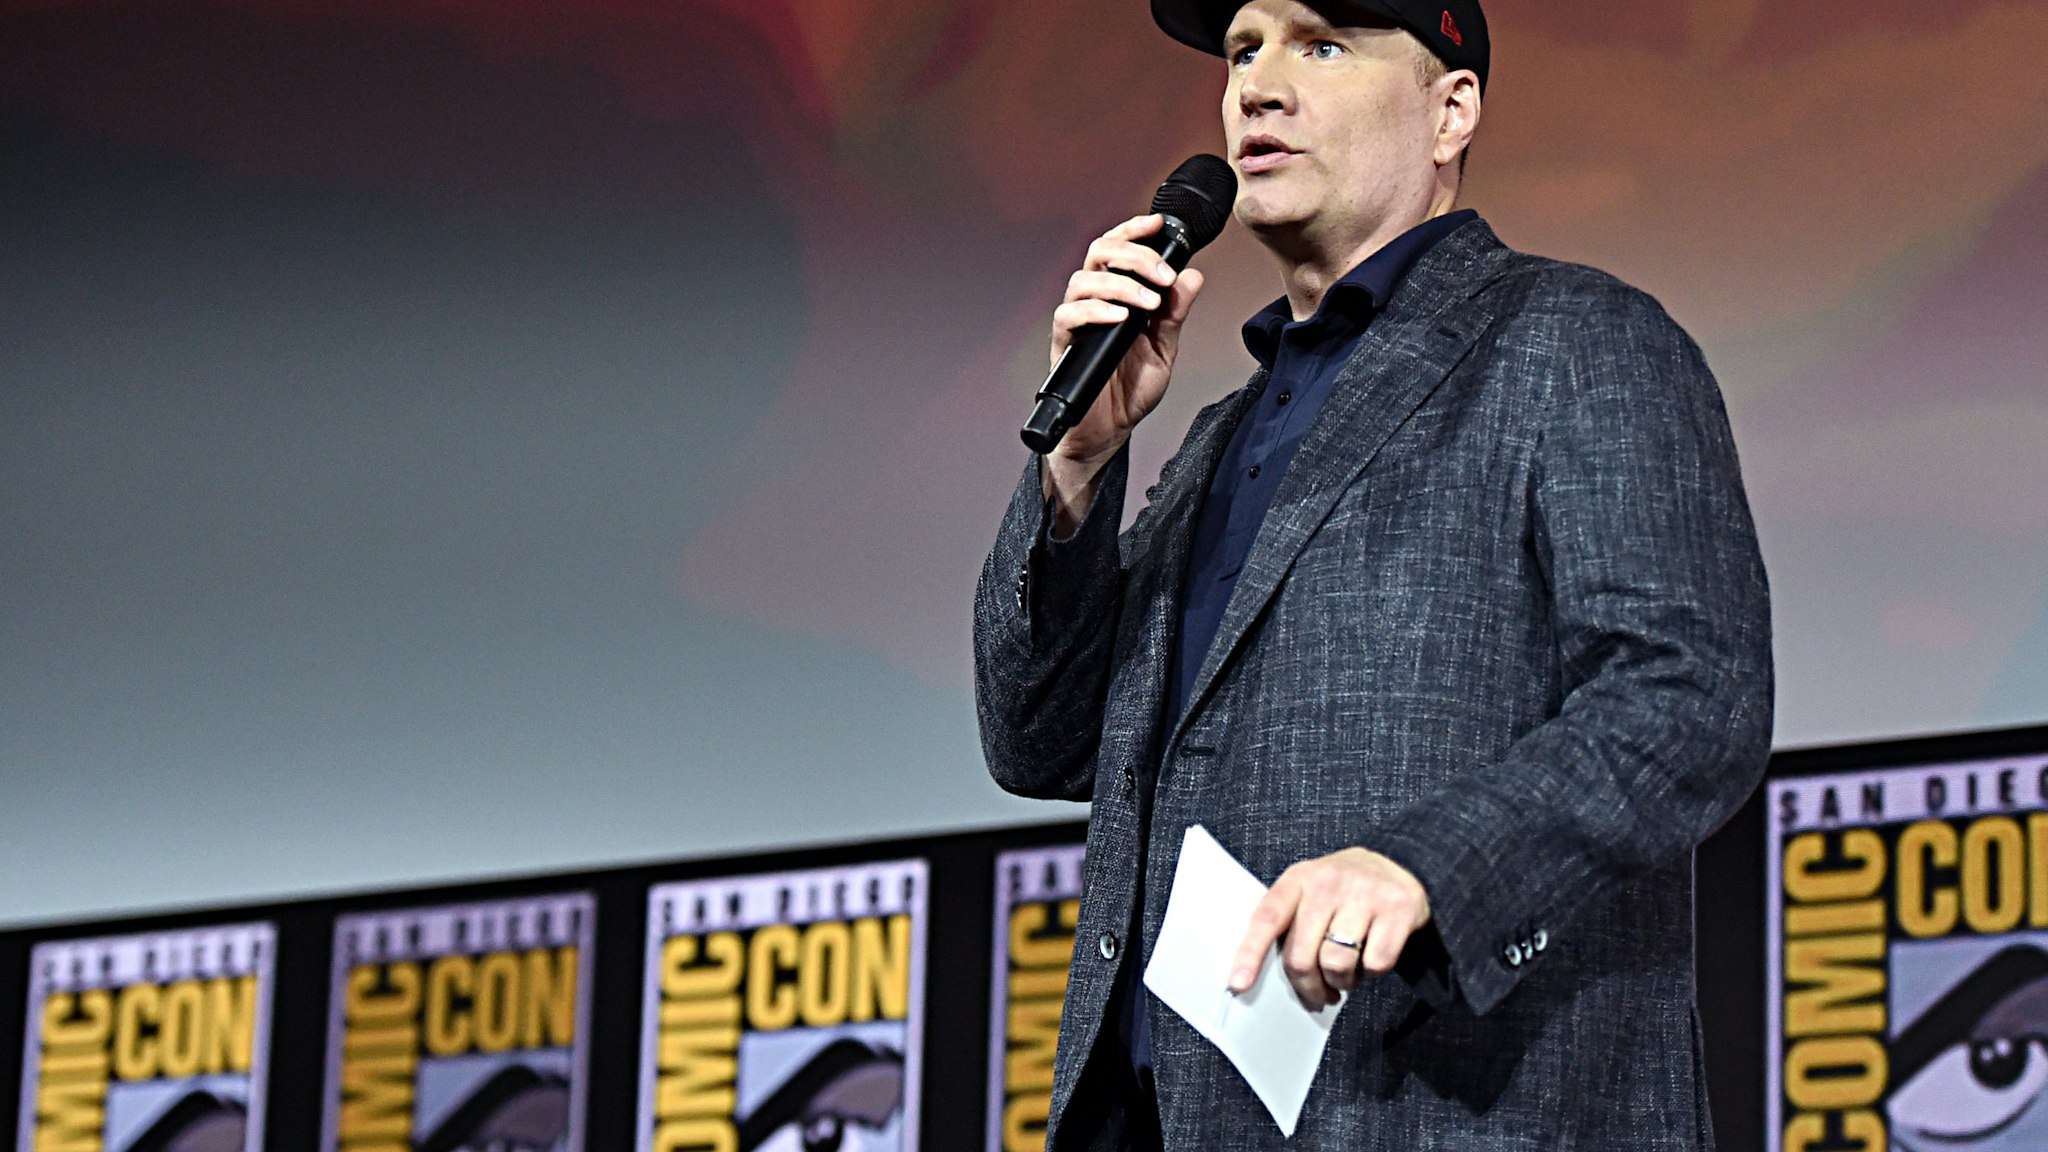 AN DIEGO, CALIFORNIA - JULY 20: President of Marvel Studios Kevin Feige at the San Diego Comic-Con International 2019 Marvel Studios Panel in Hall H on July 20, 2019 in San Diego, California. (Photo by Alberto E. Rodriguez/Getty Images for Disney)